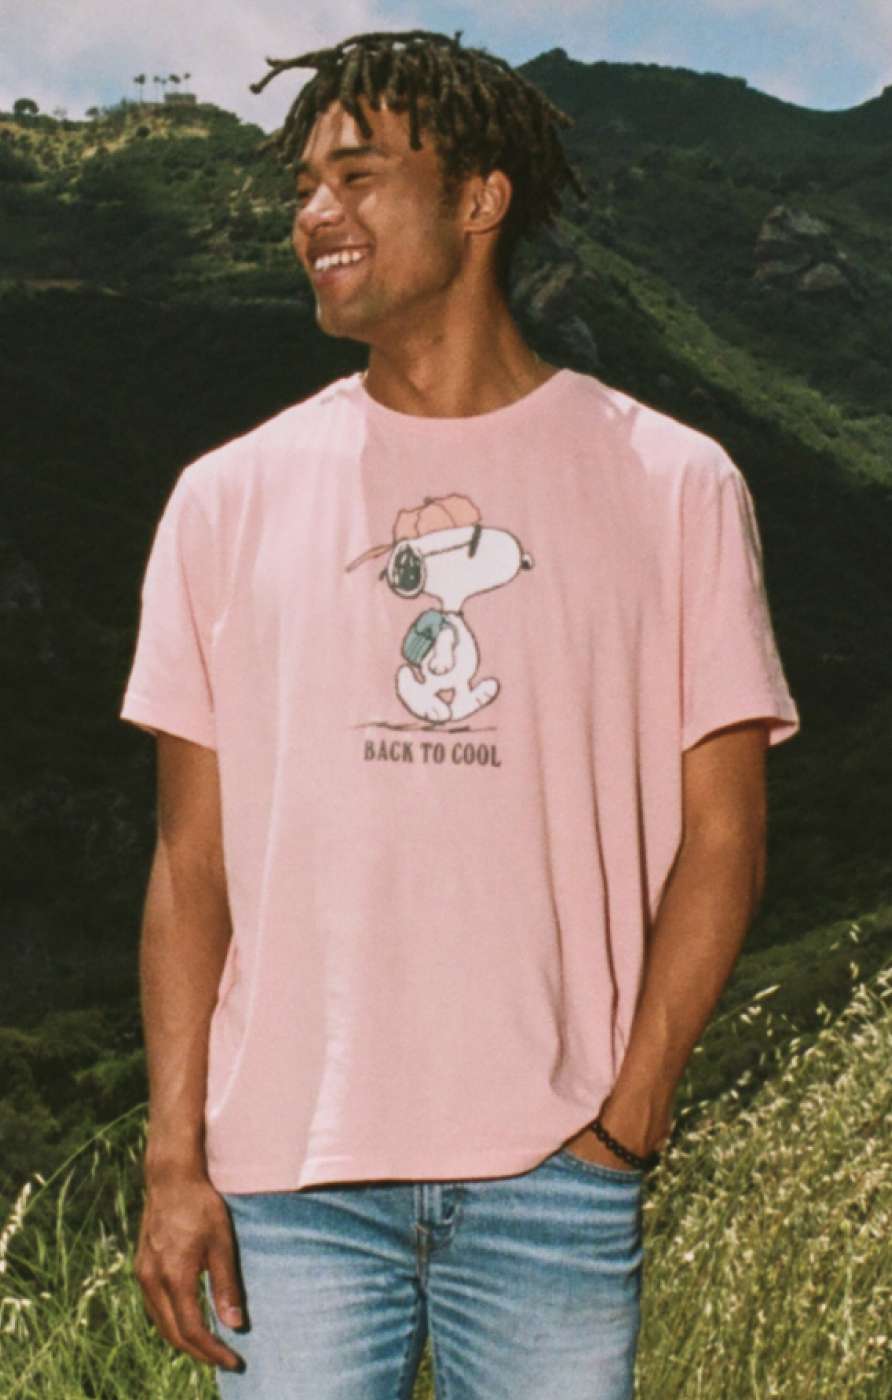 Model in pink graphic tee